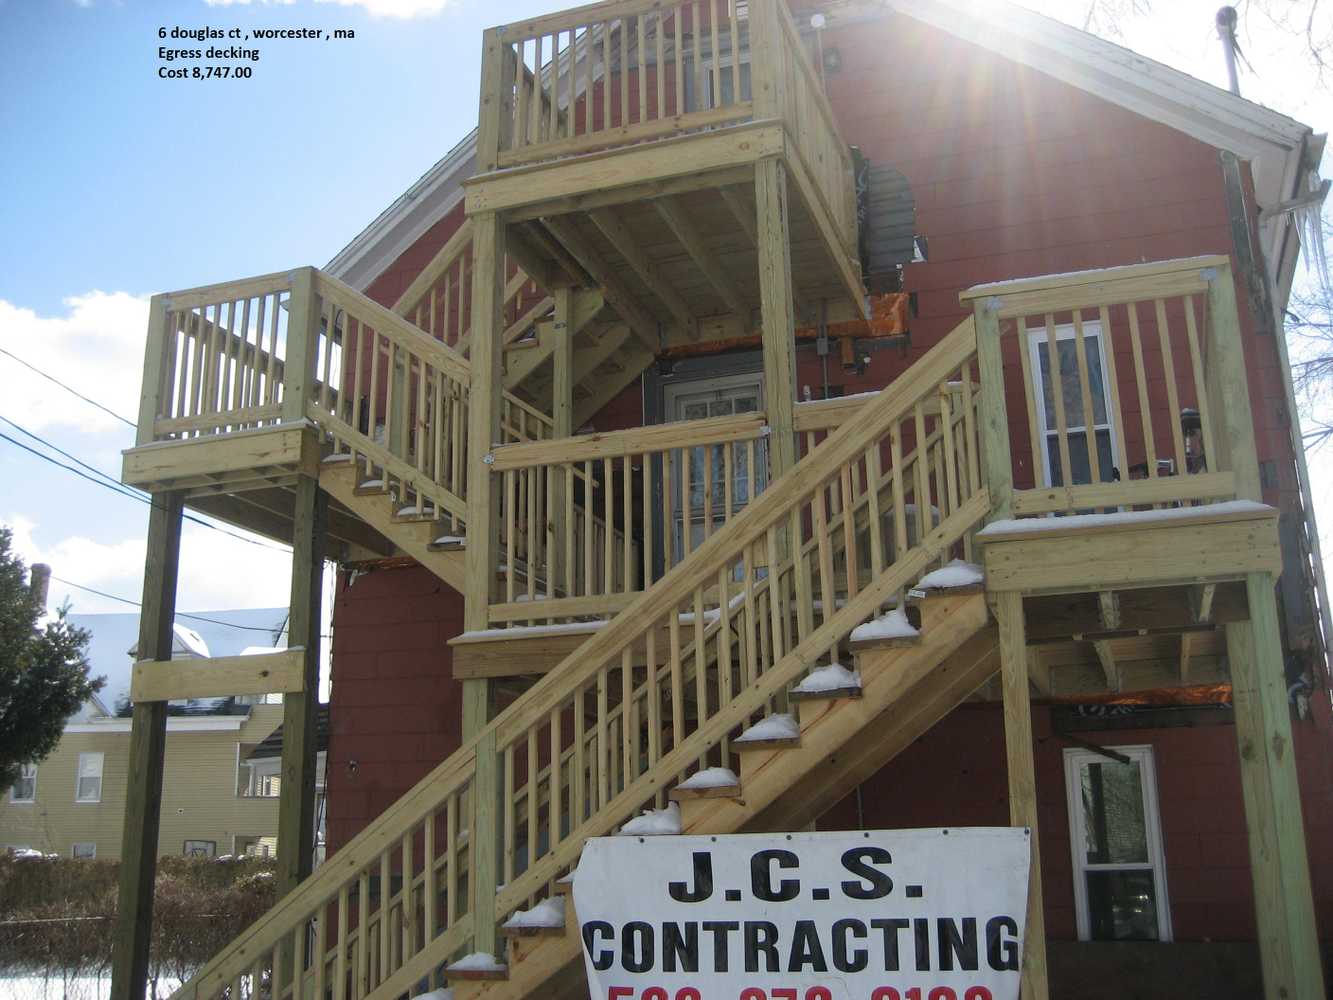 Photos from Joe C Spring Contracting